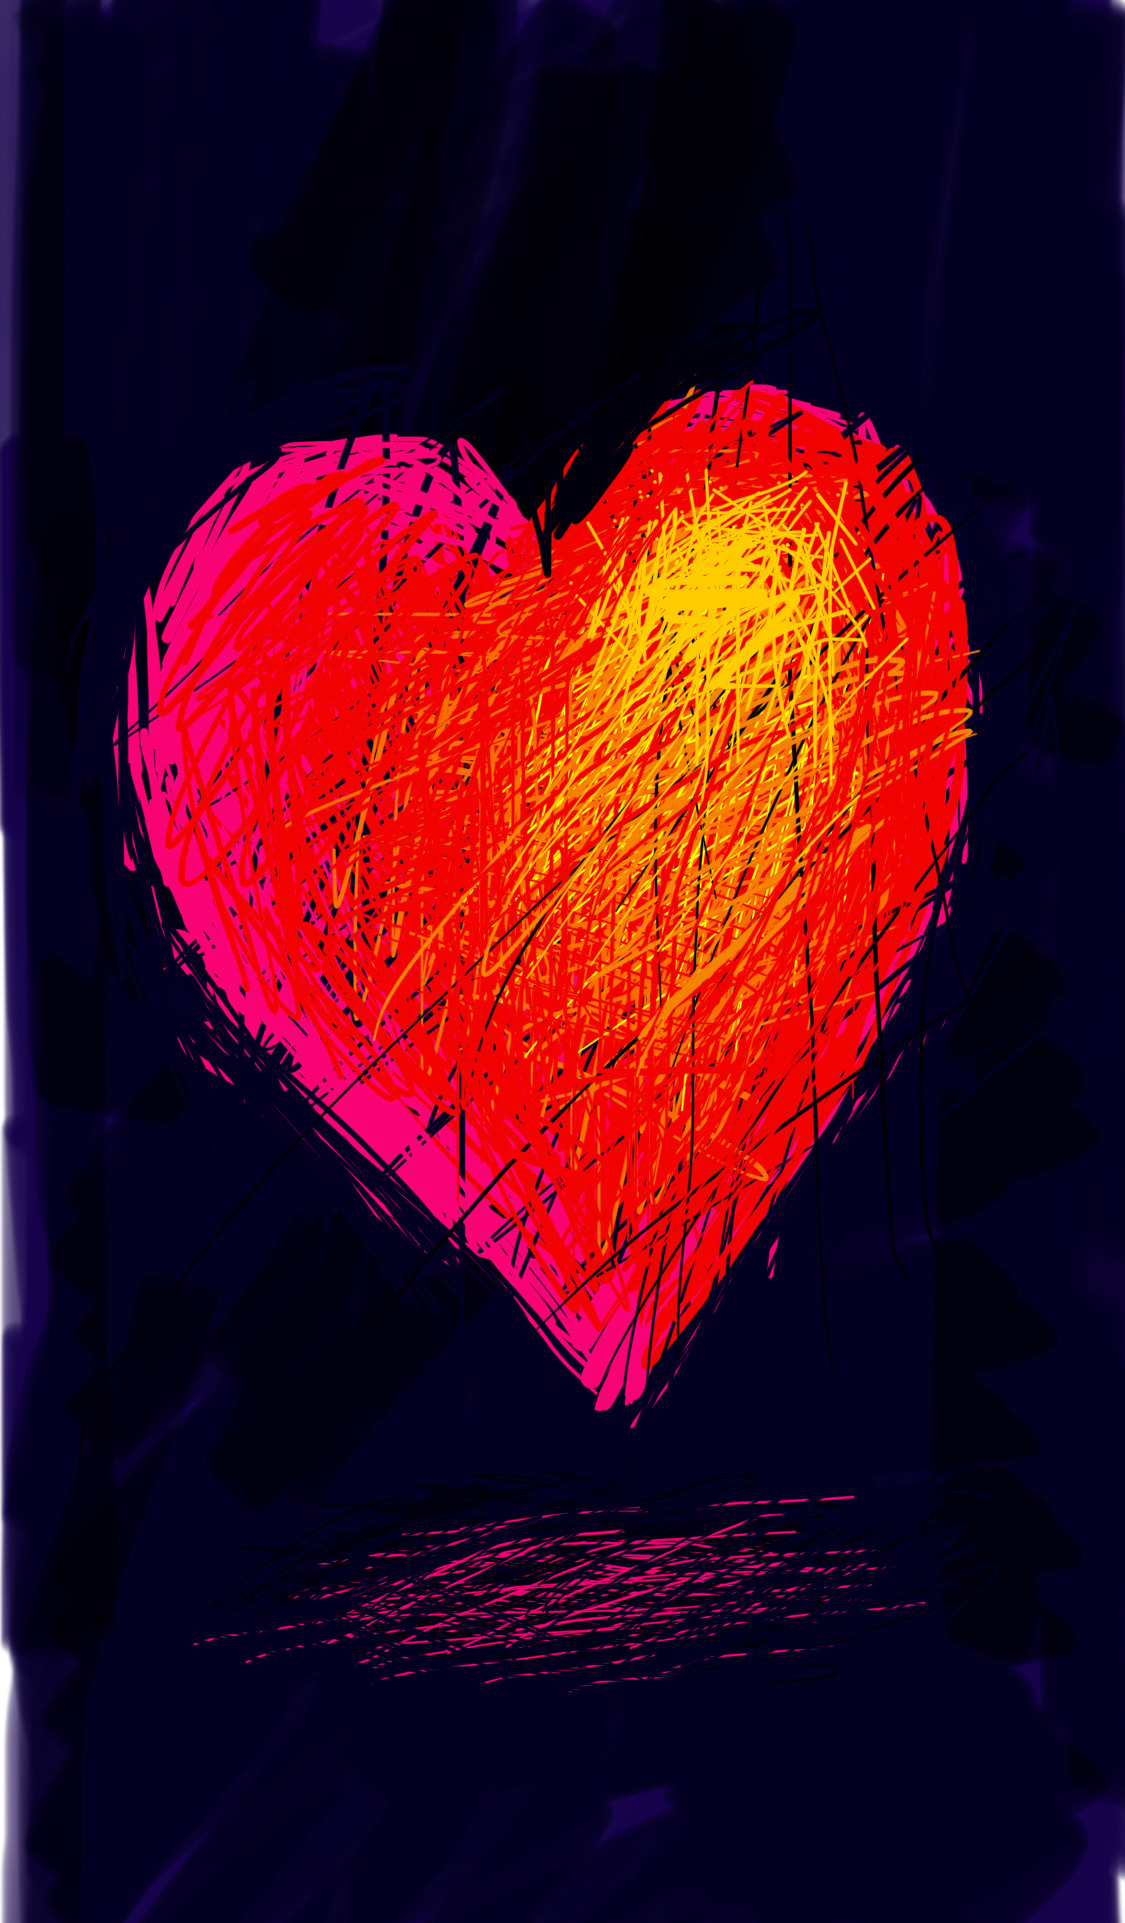 A glowing red heart